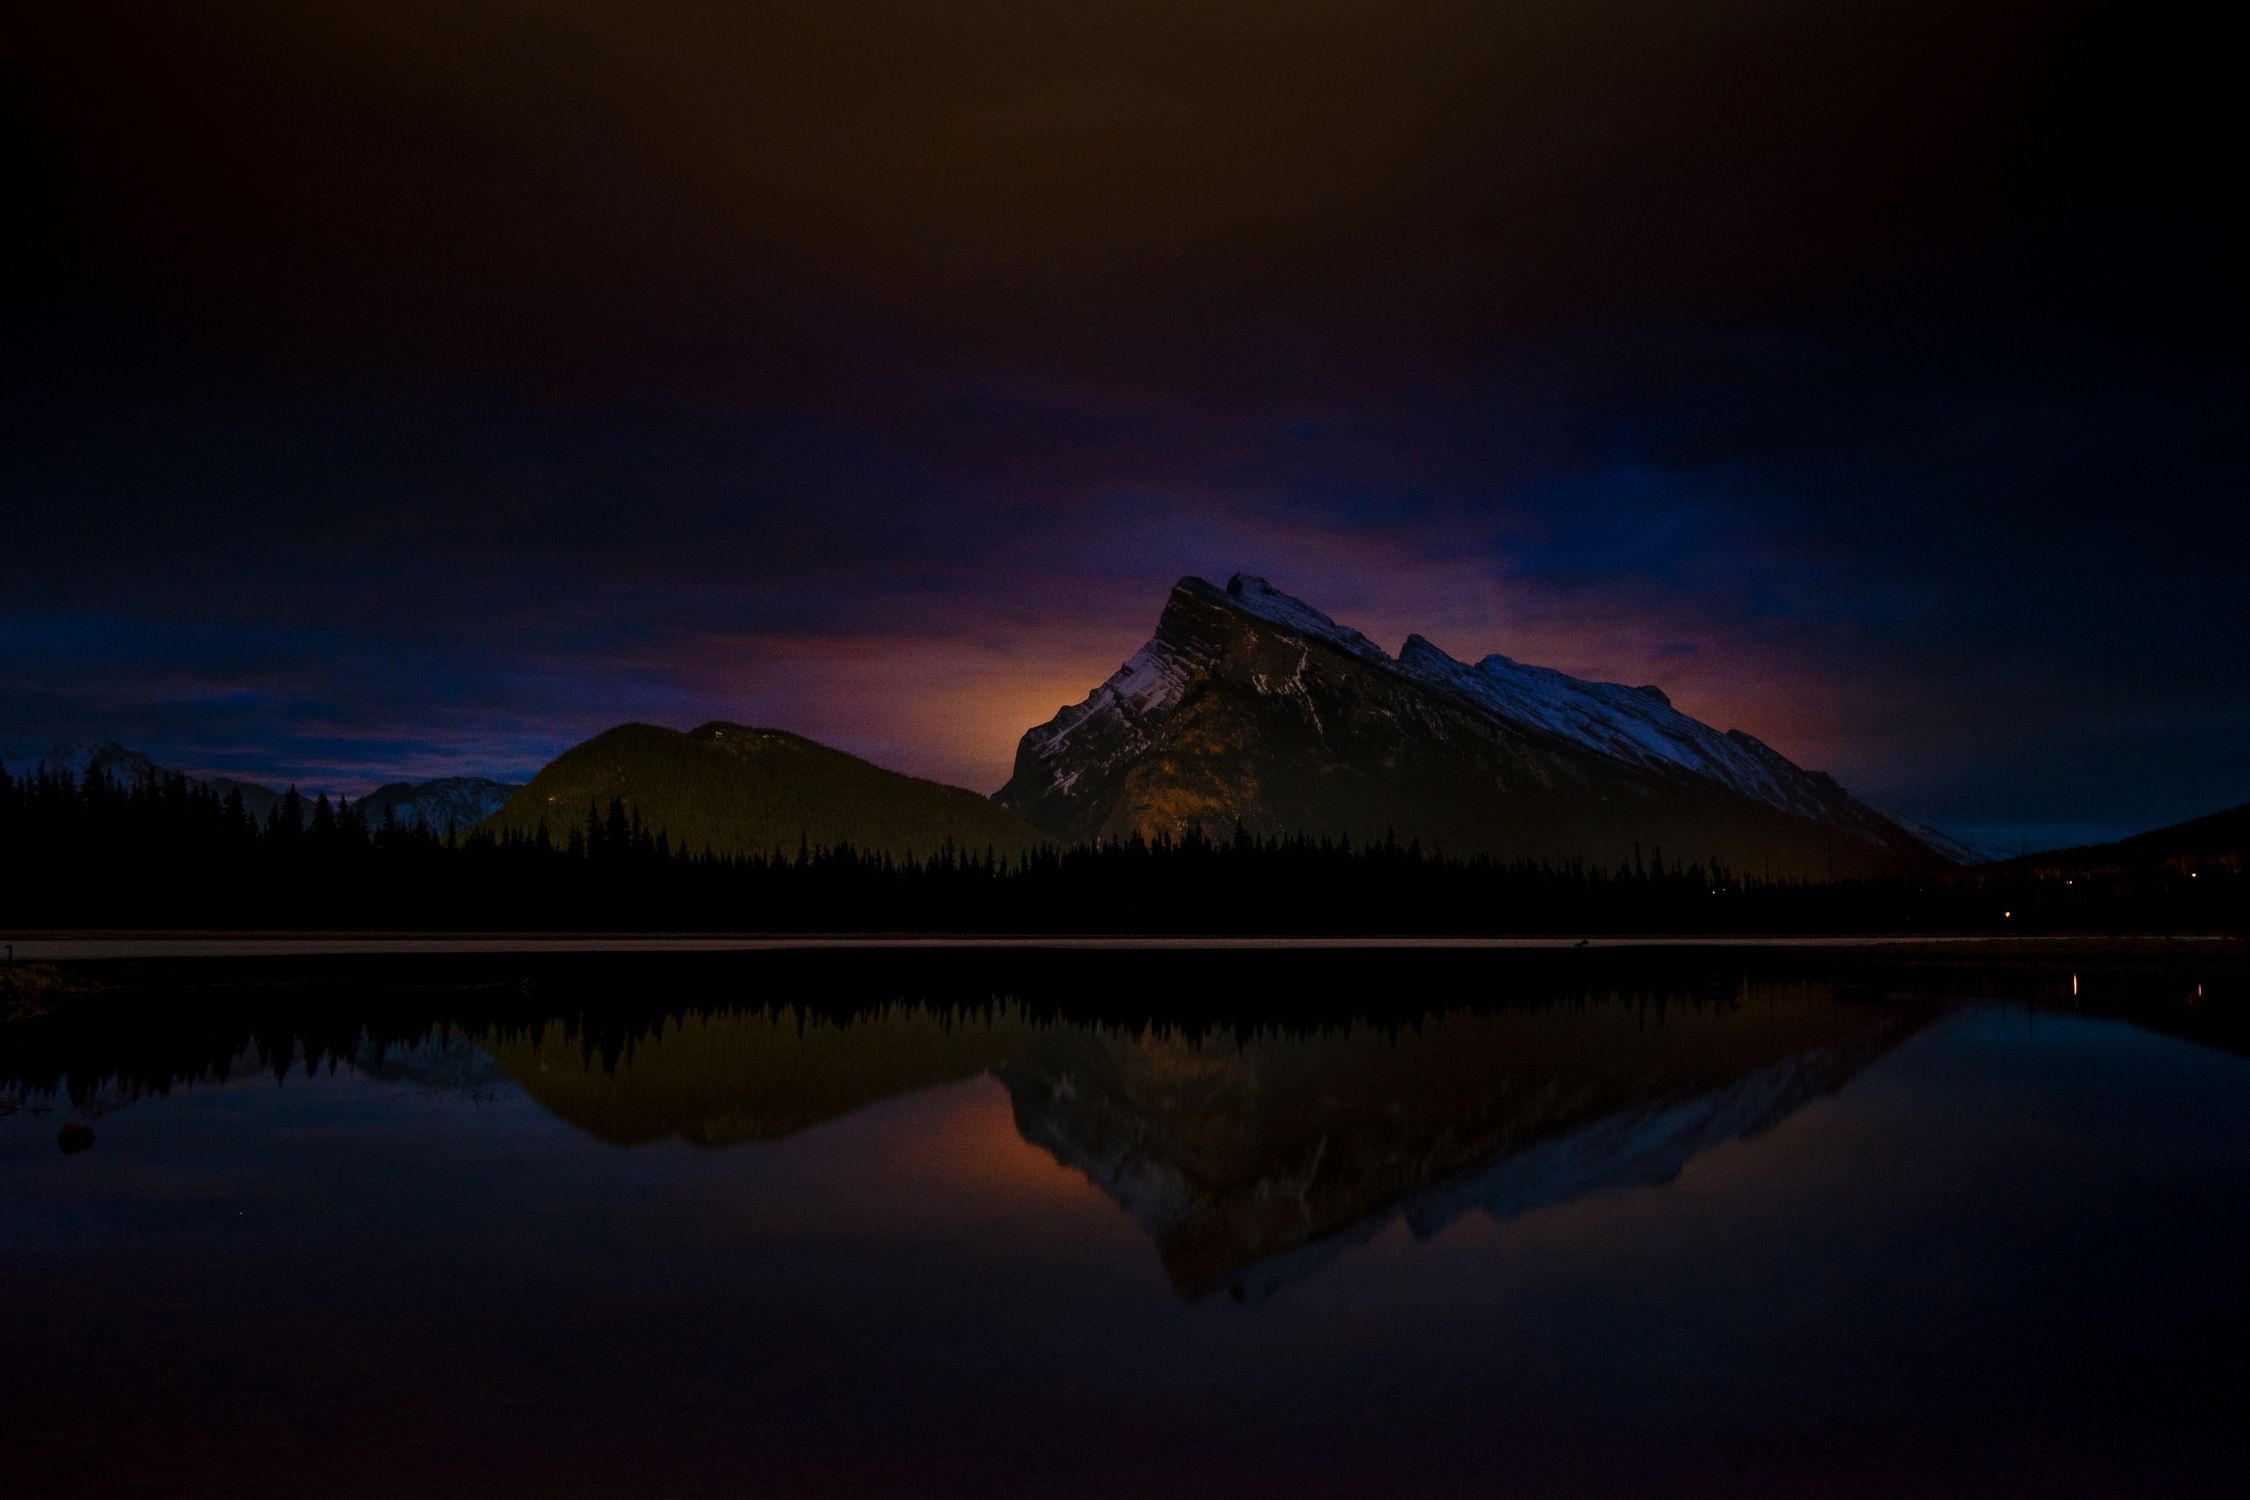 The town of Banff at night from Vermillion Lakes